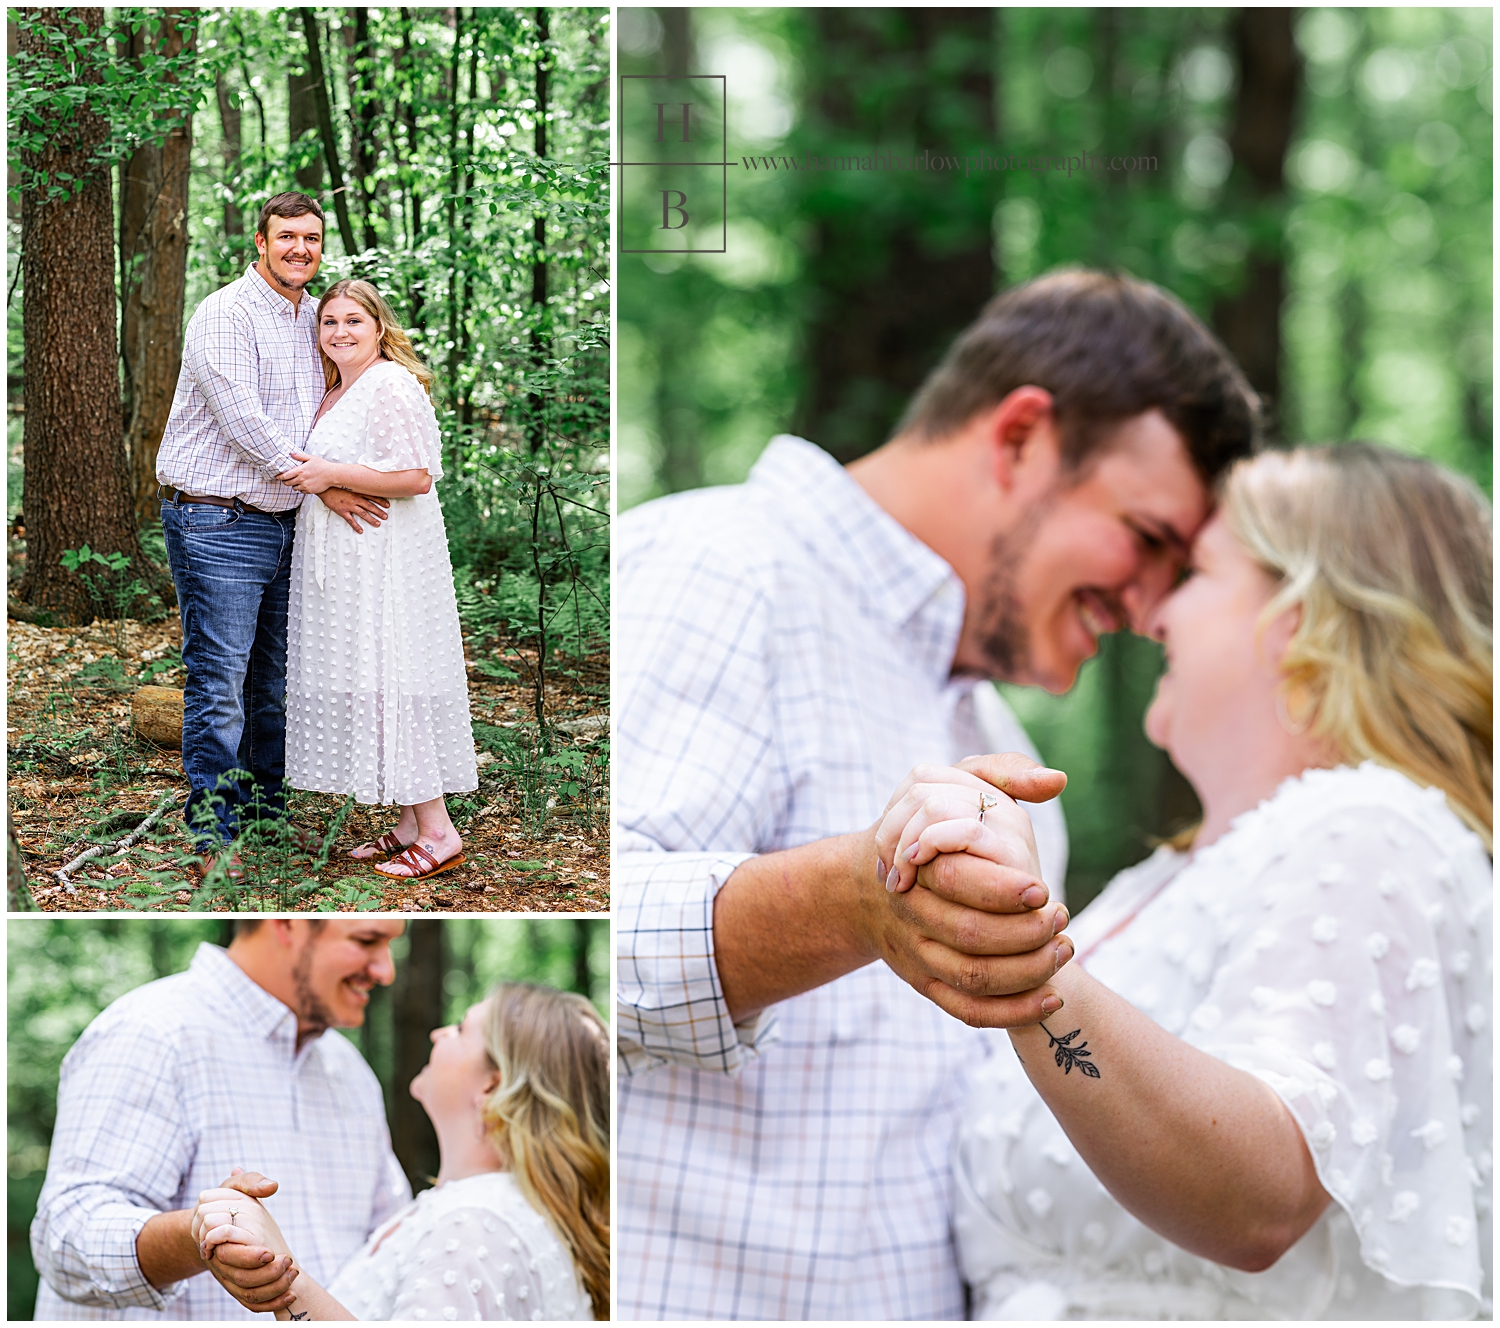 Man and woman embrace in forest for engagement photos